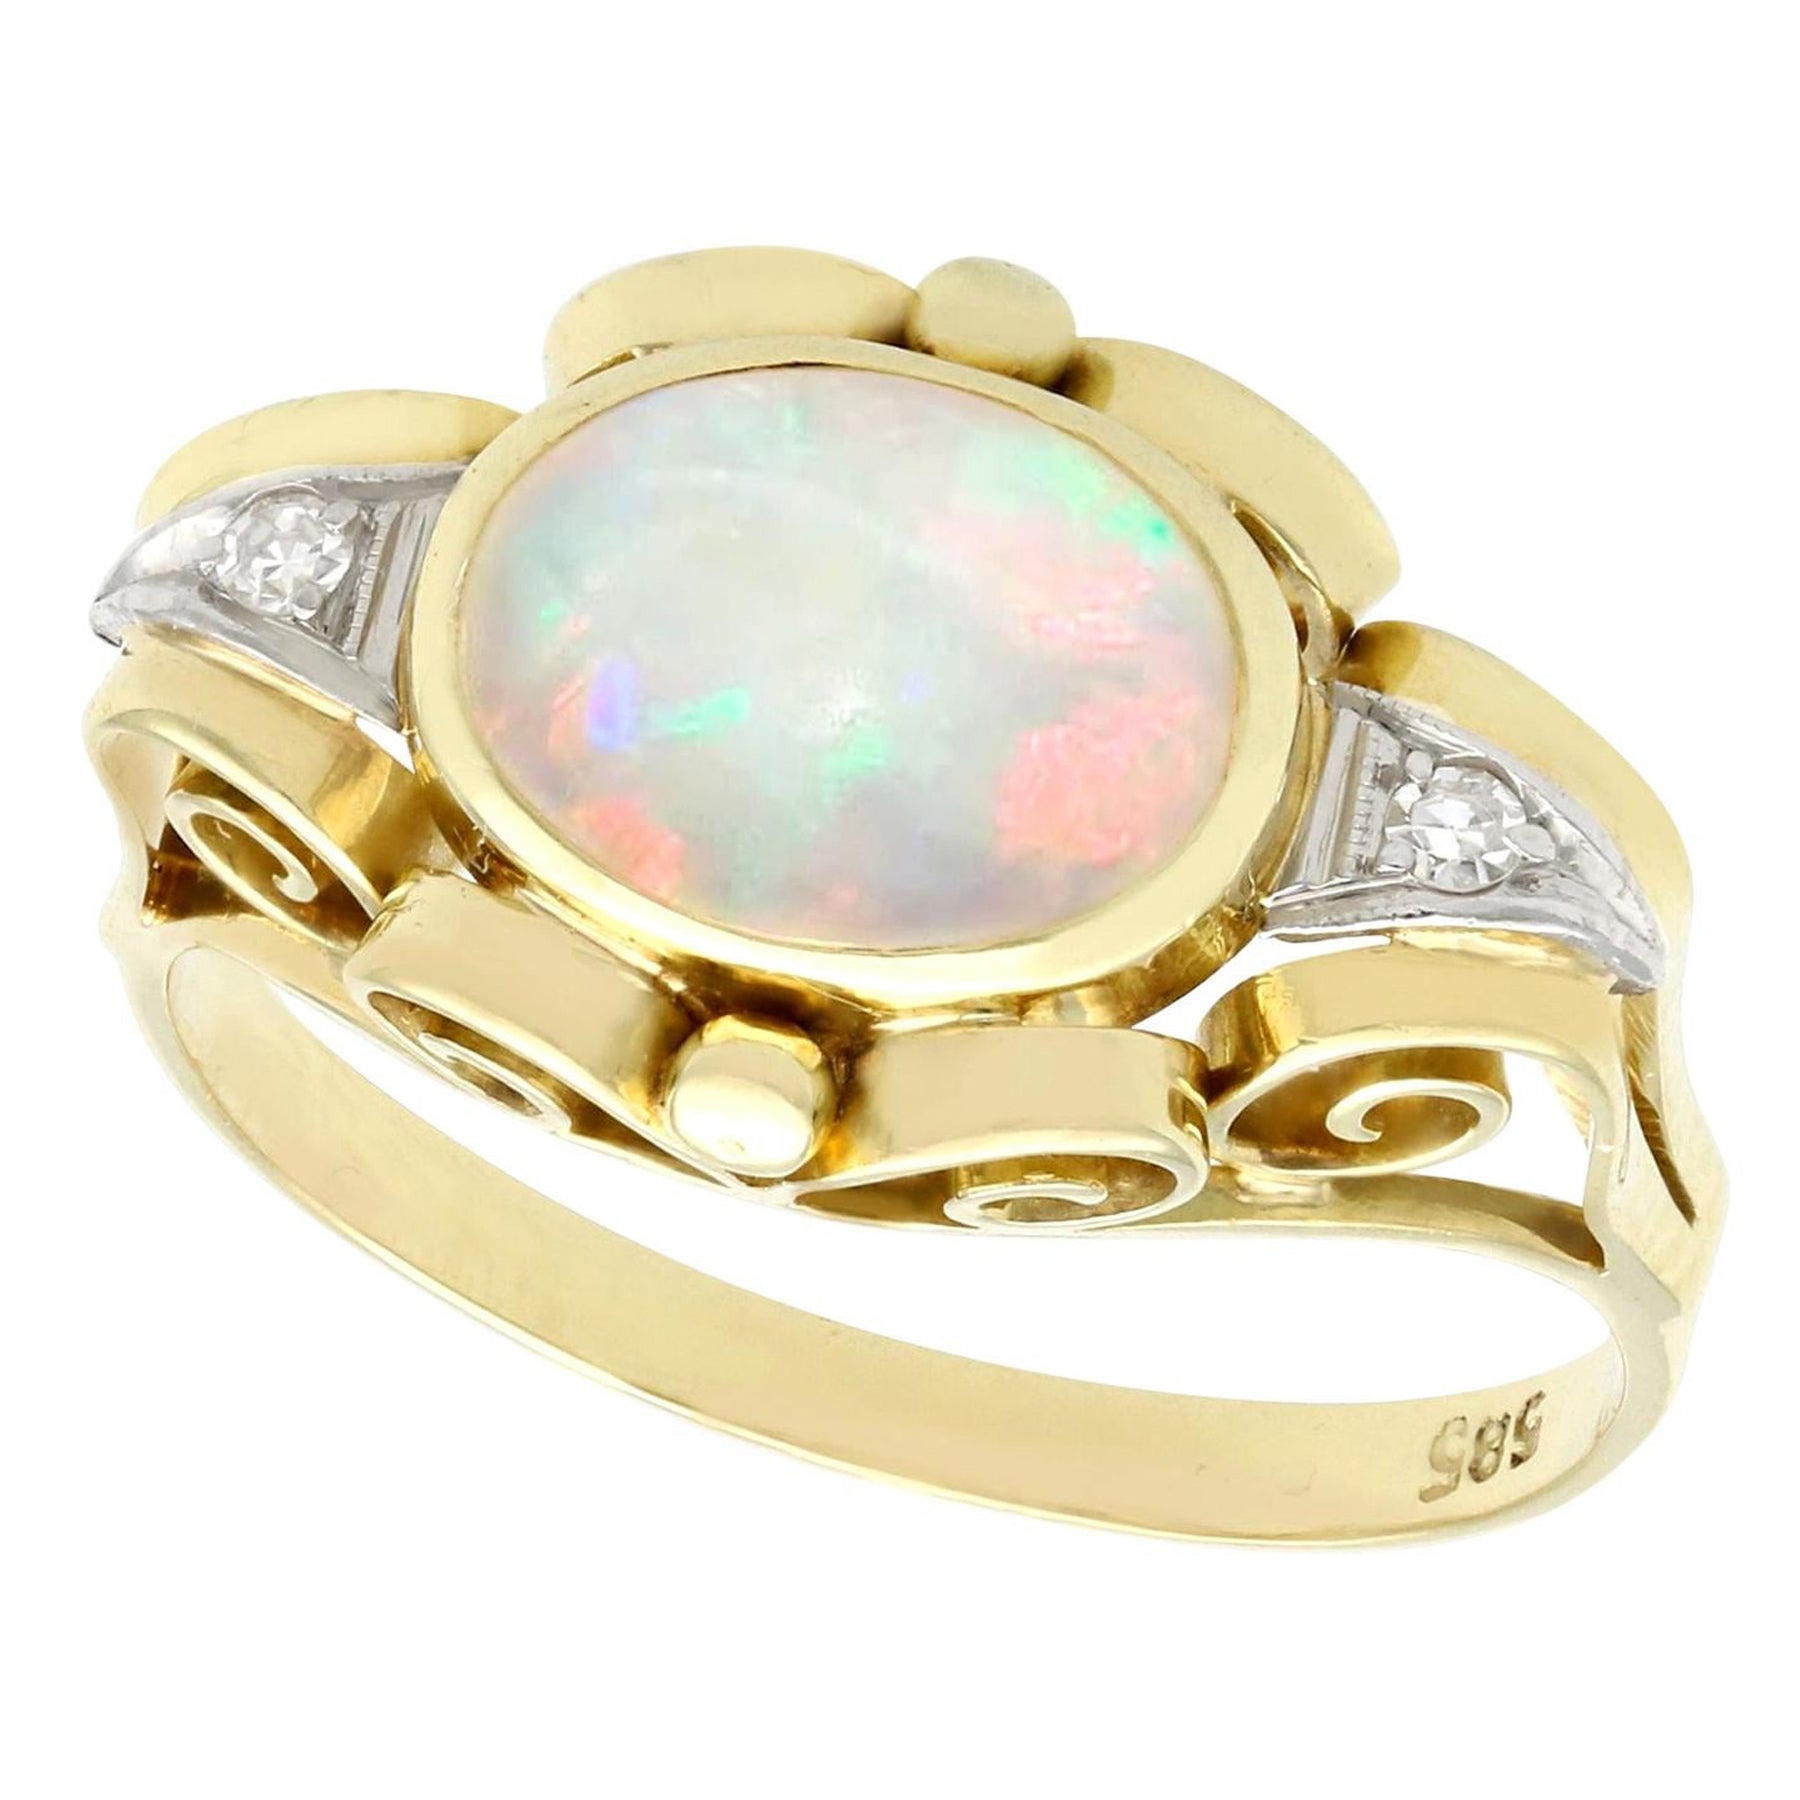 1940s Cabochon Cut Opal and Diamond Yellow Gold Cocktail Ring